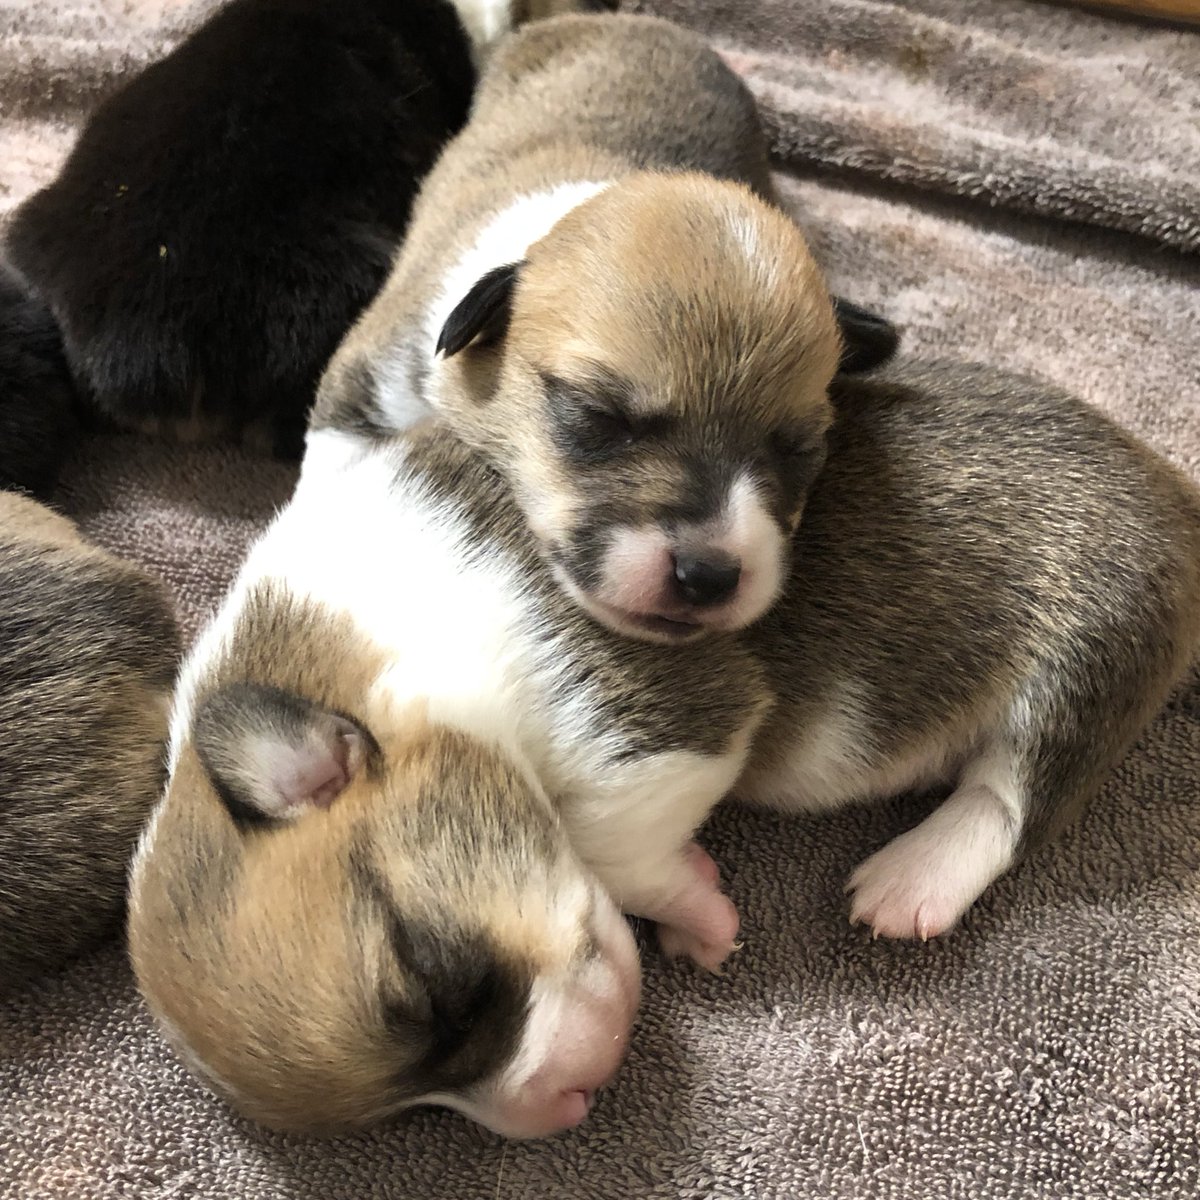 2 weeks old tomorrow, still waiting for those eyes to open! 